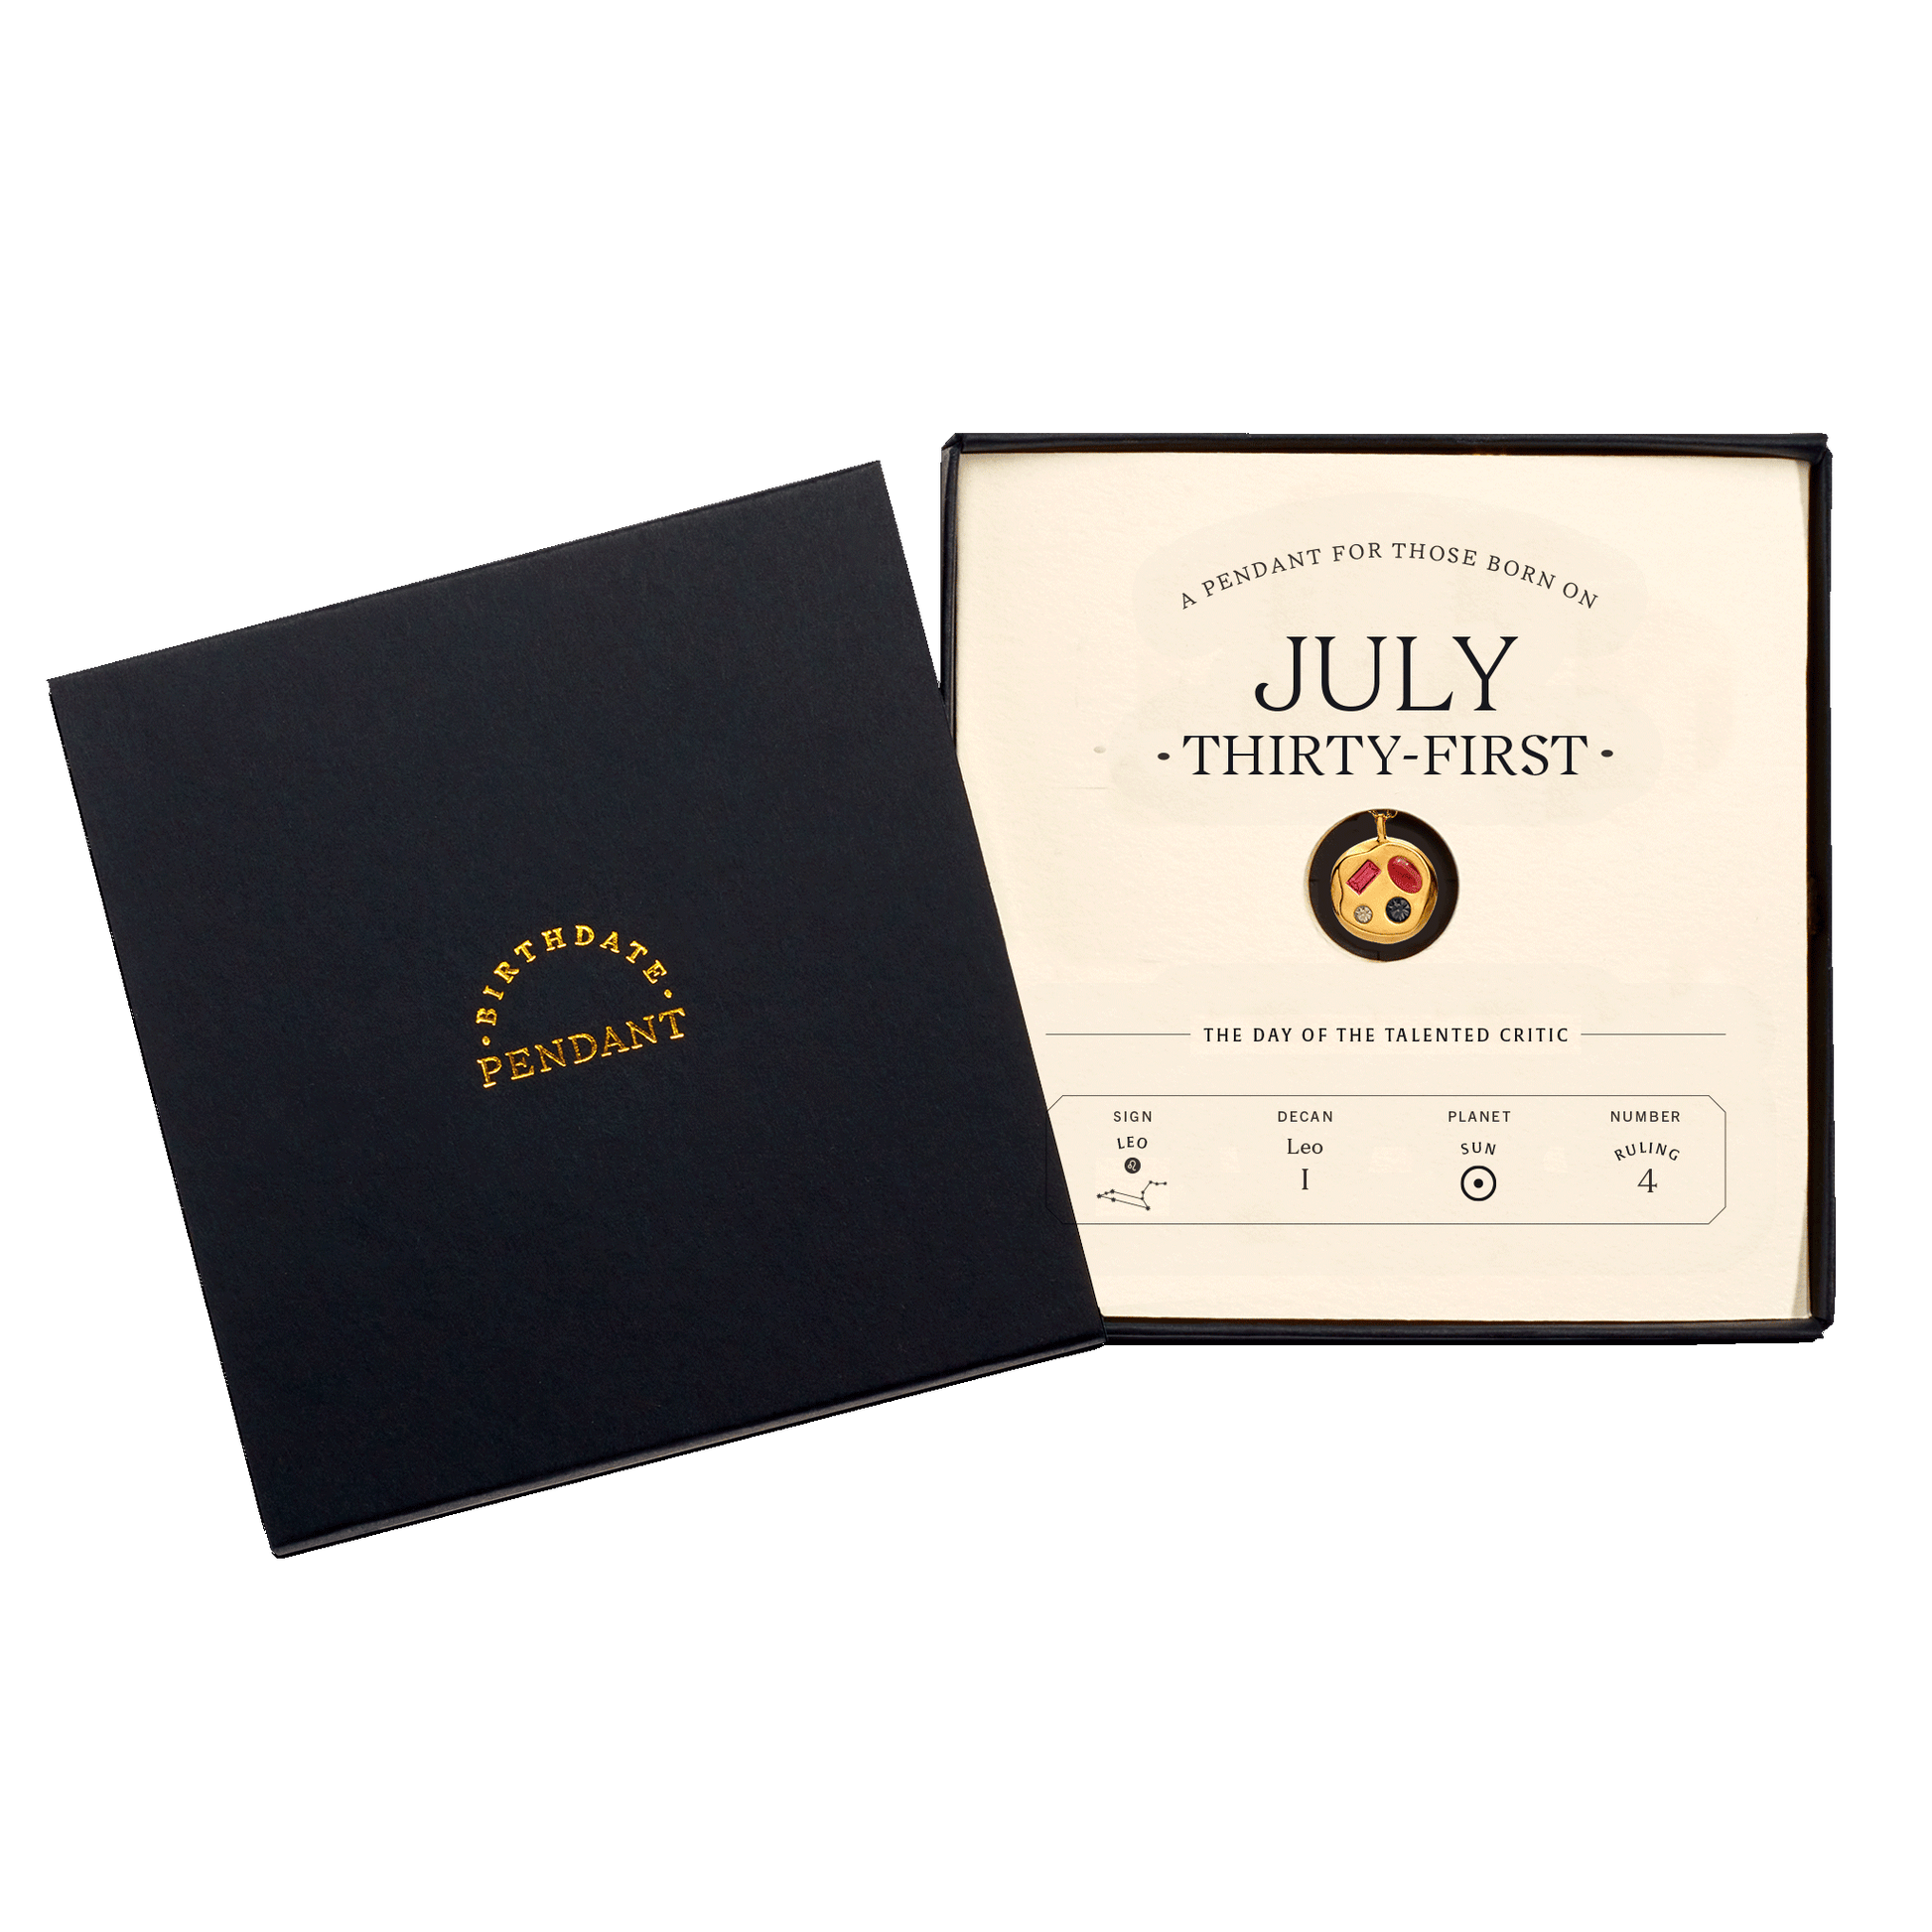 The July Thirty-First Pendant inside its box